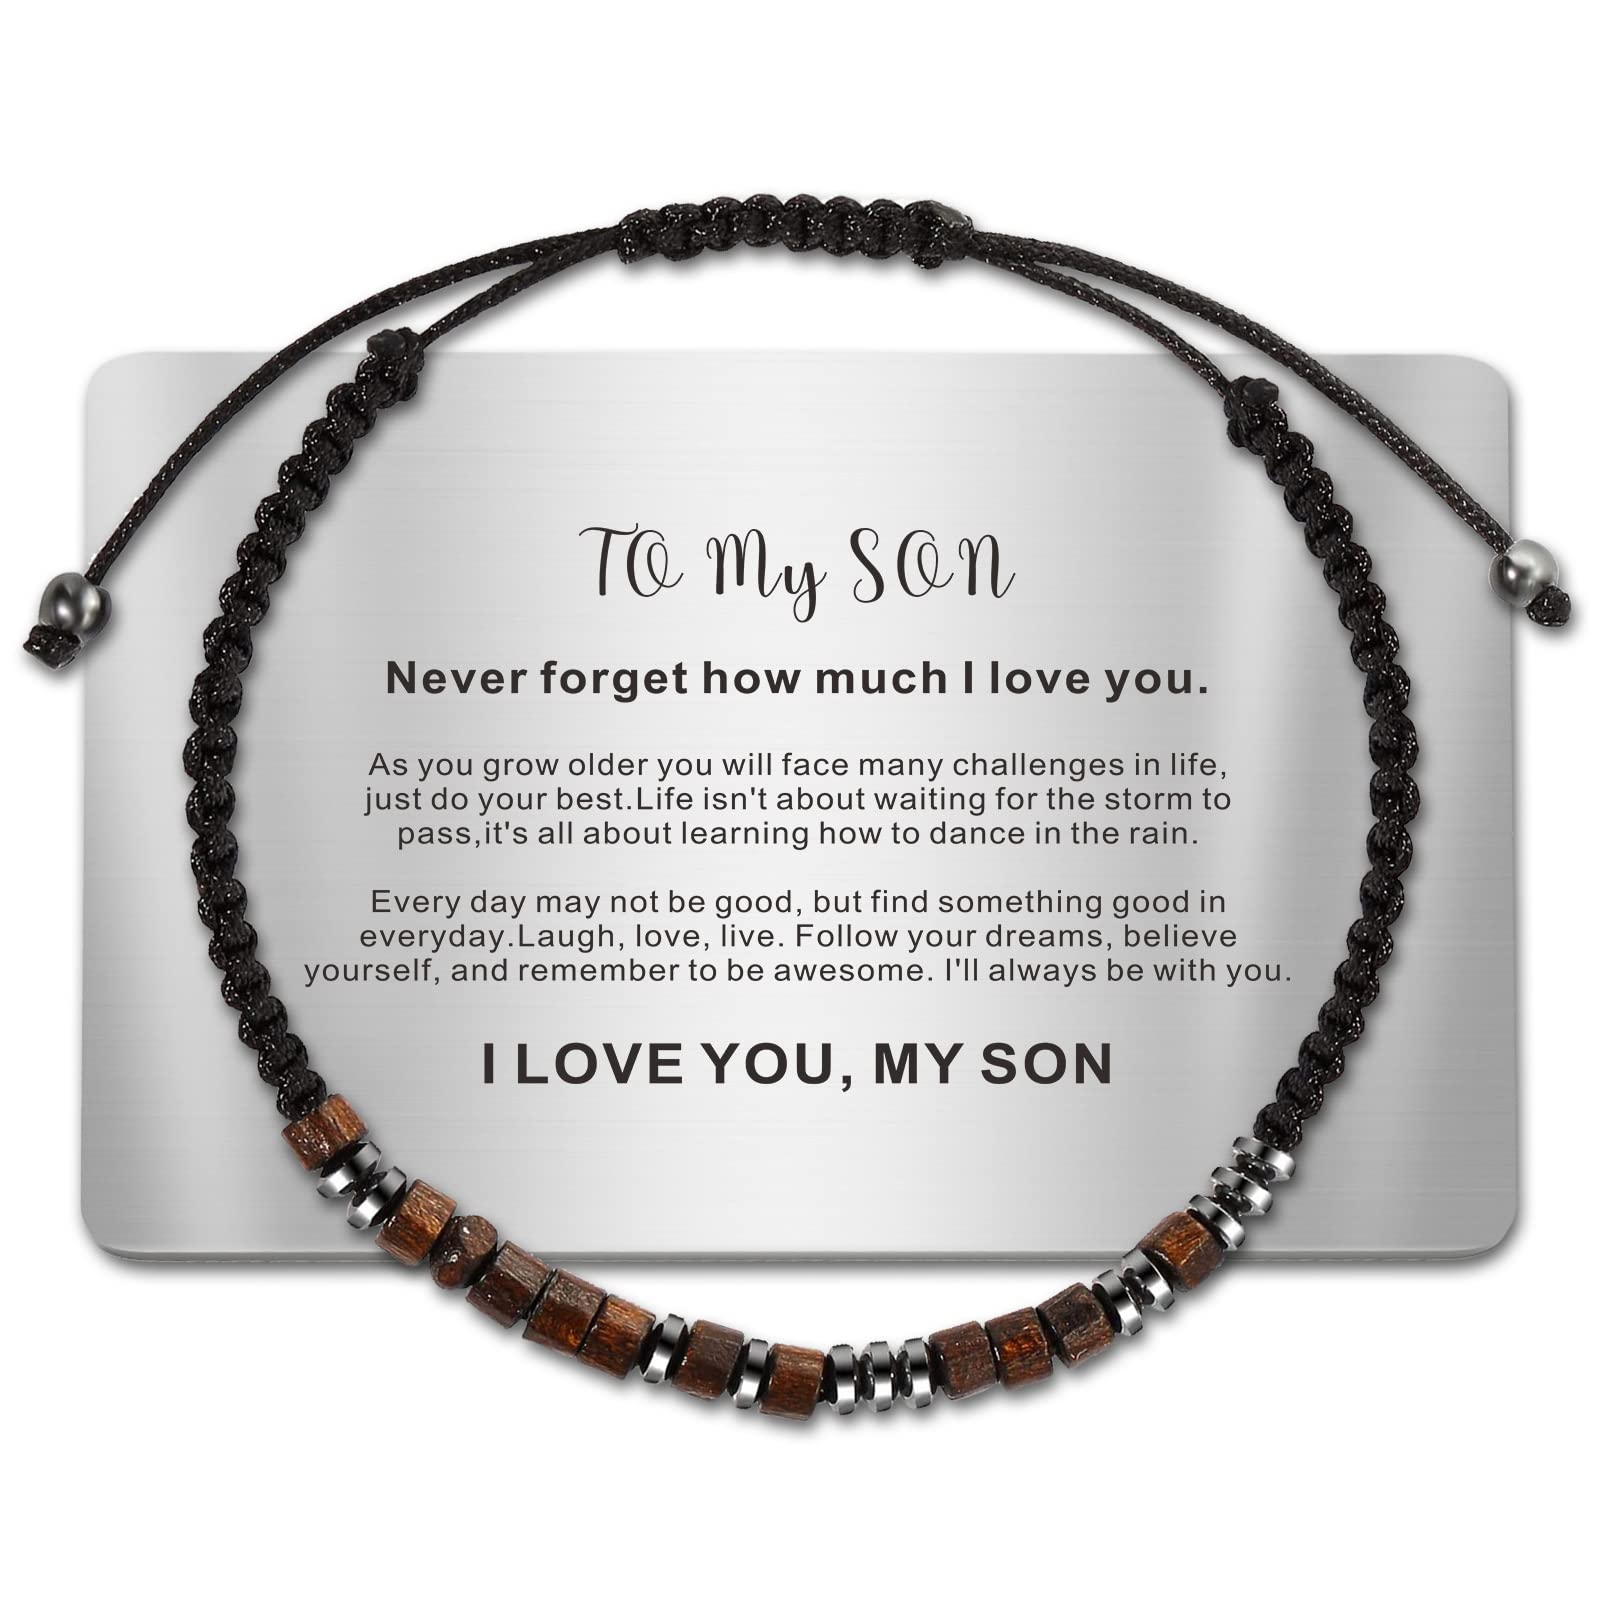 To my son, with Wallet Card